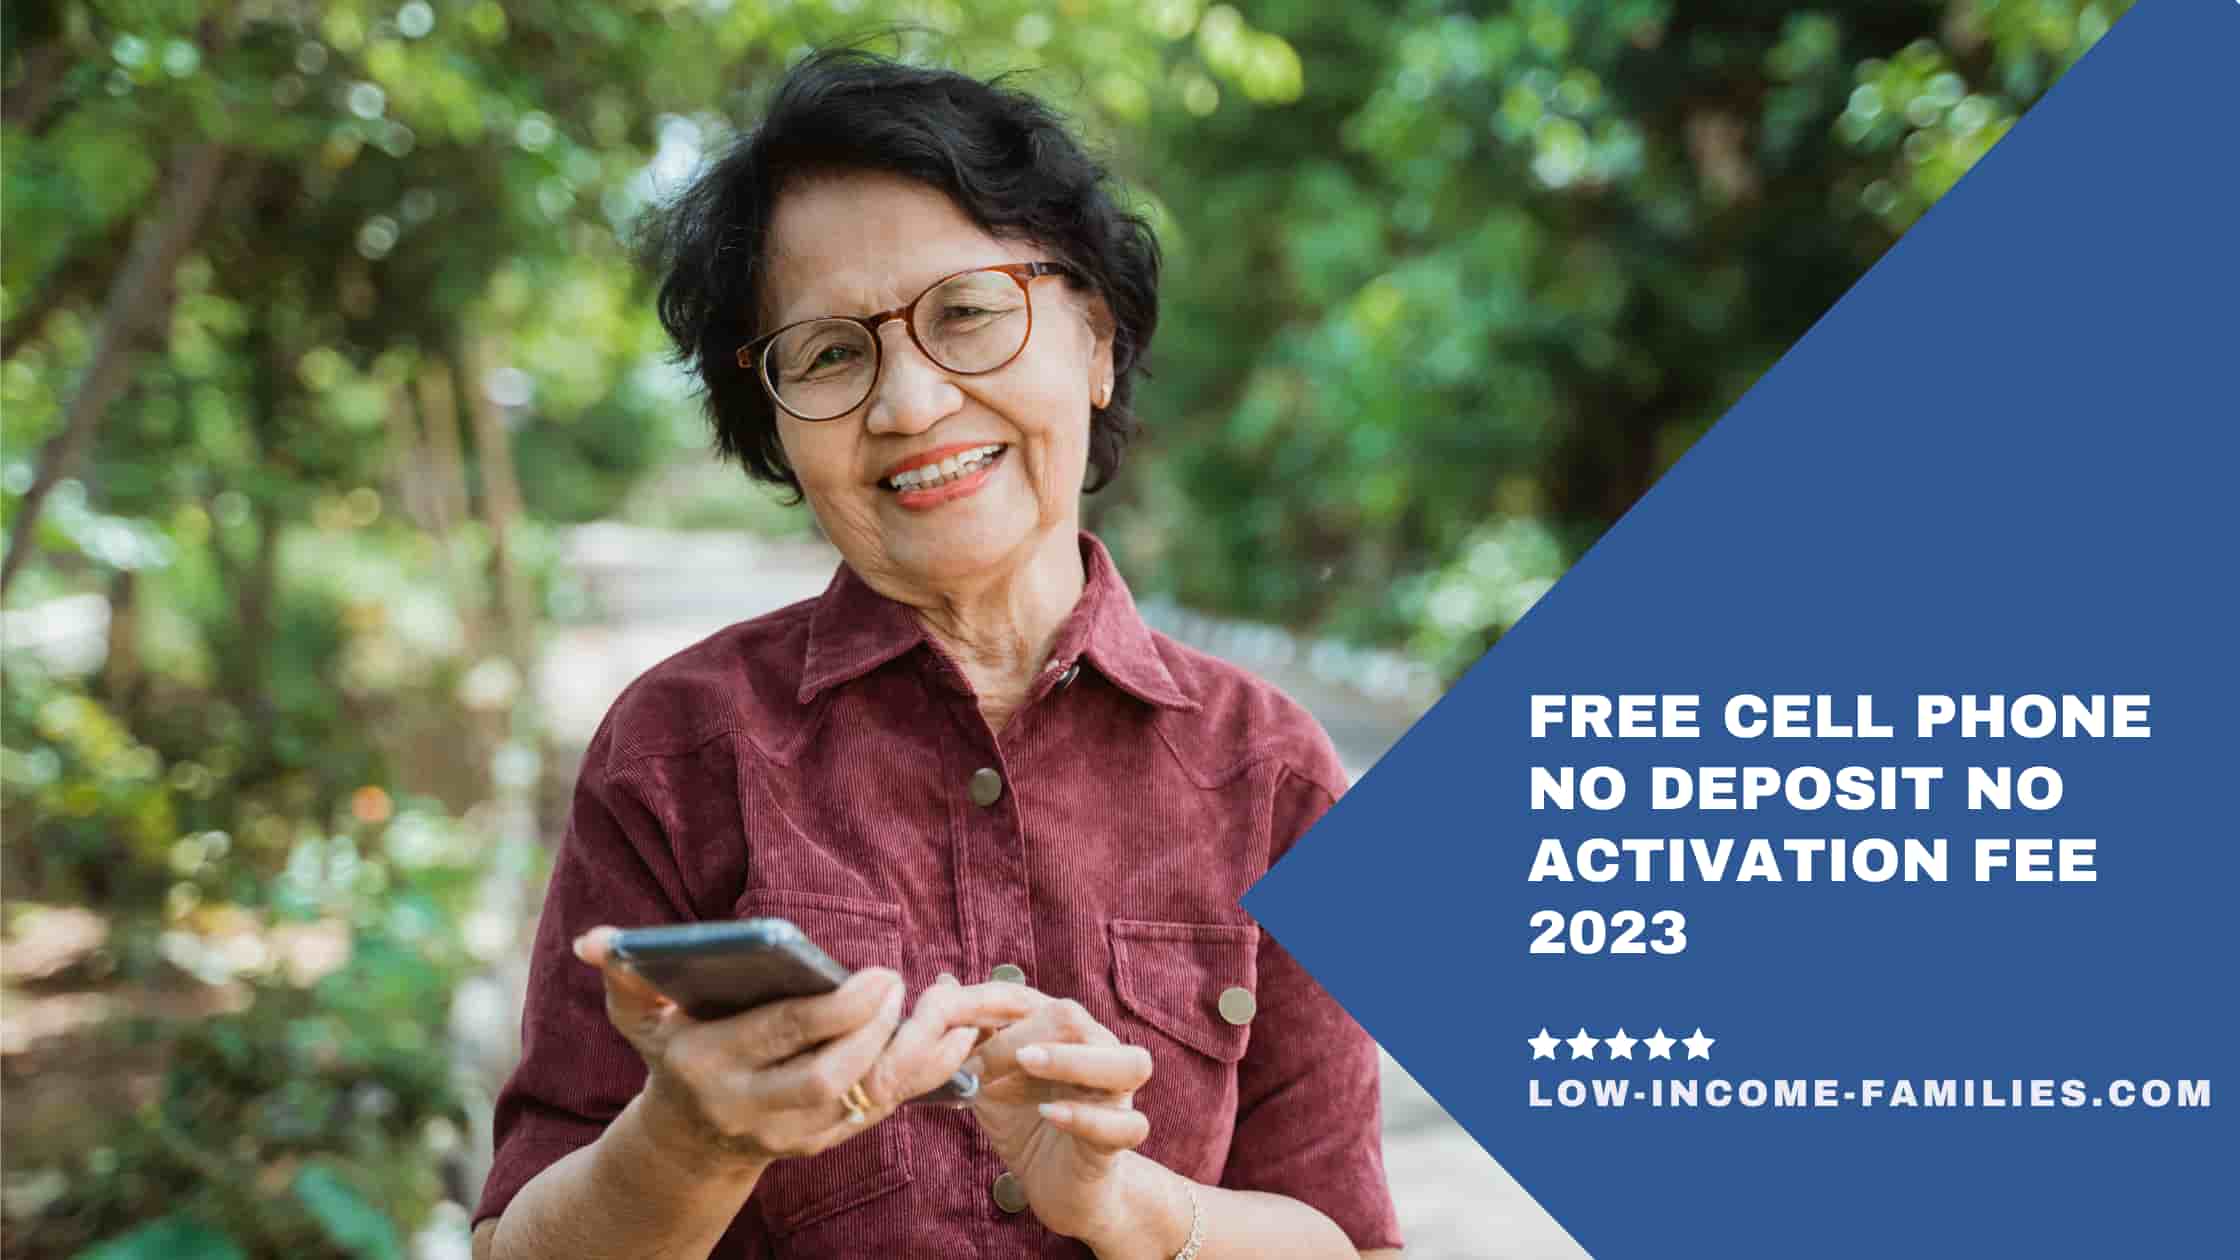 Free Cell Phone No Deposit No Activation Fee 2023